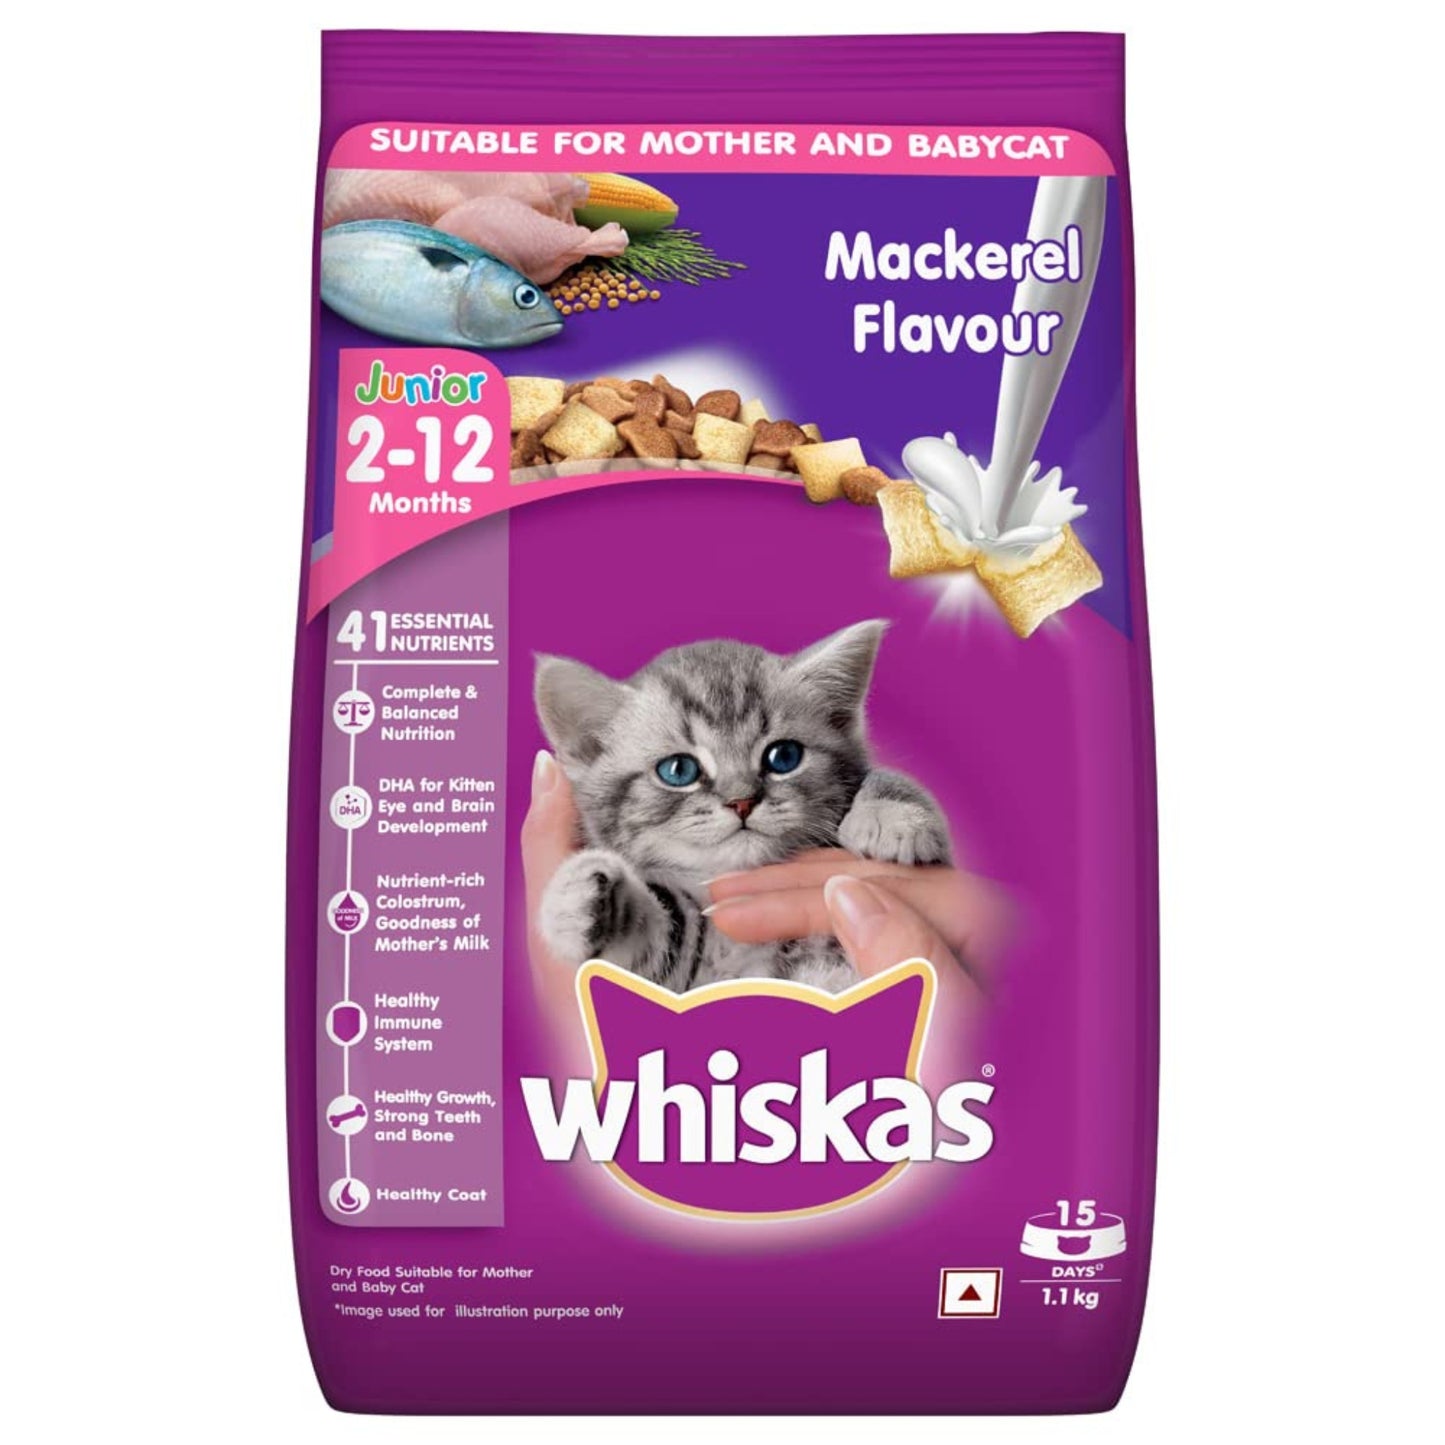 Whiskas Dry Cat Food for Mother and Babycat, Mackerel Flavour, 1.1Kg